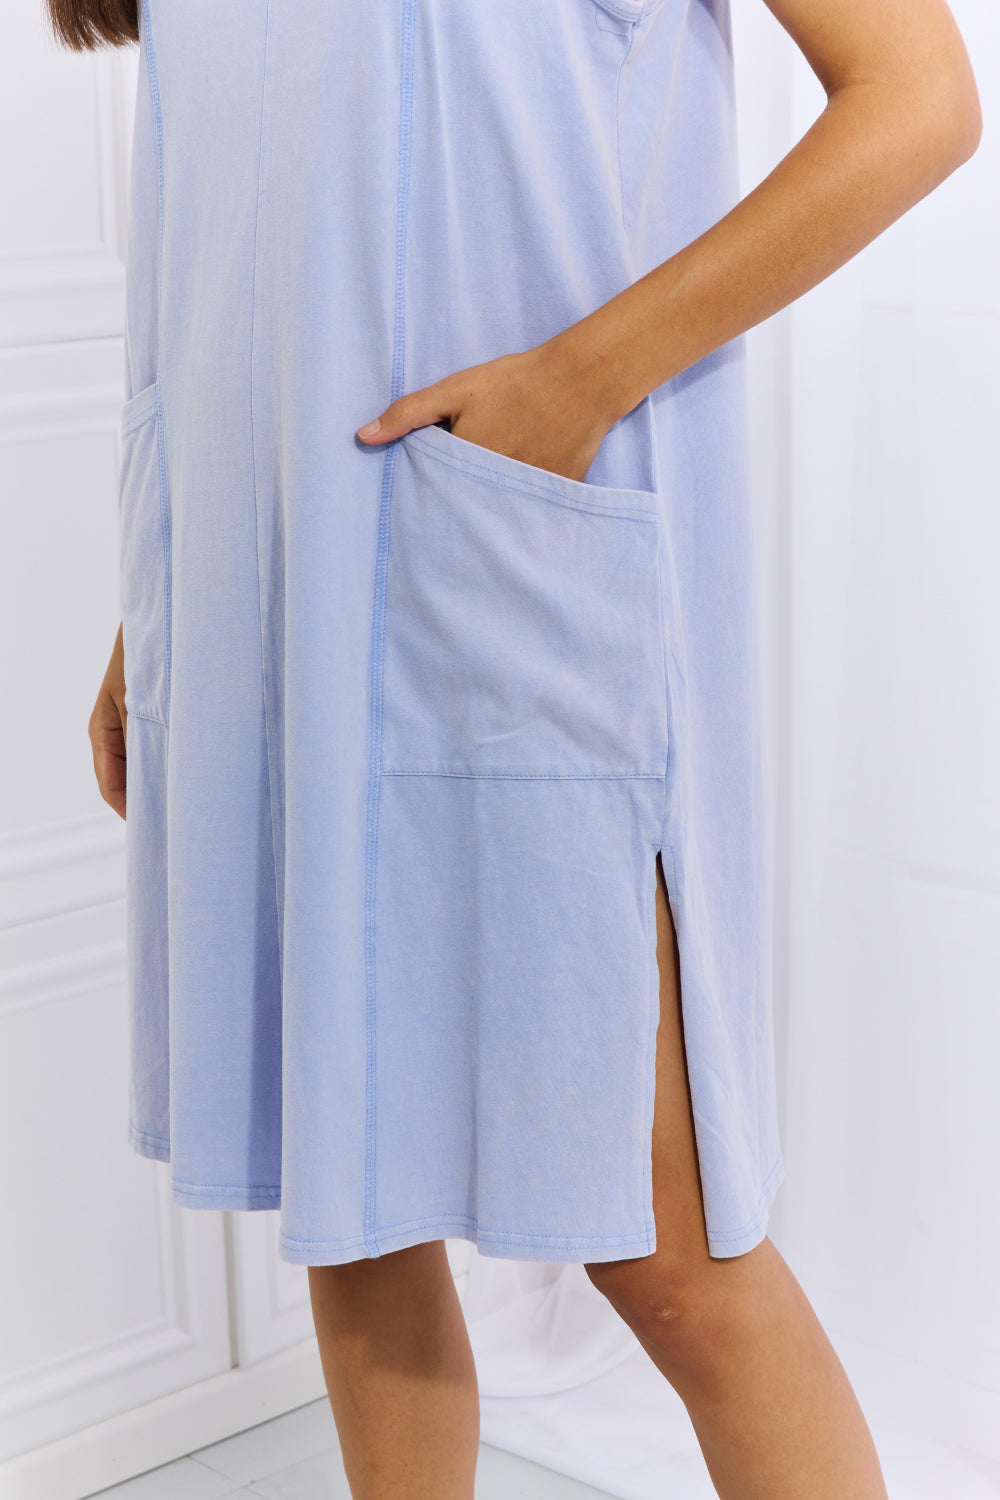 HEYSON Look Good, Feel Good Washed Sleeveless Casual Dress in Periwinkle